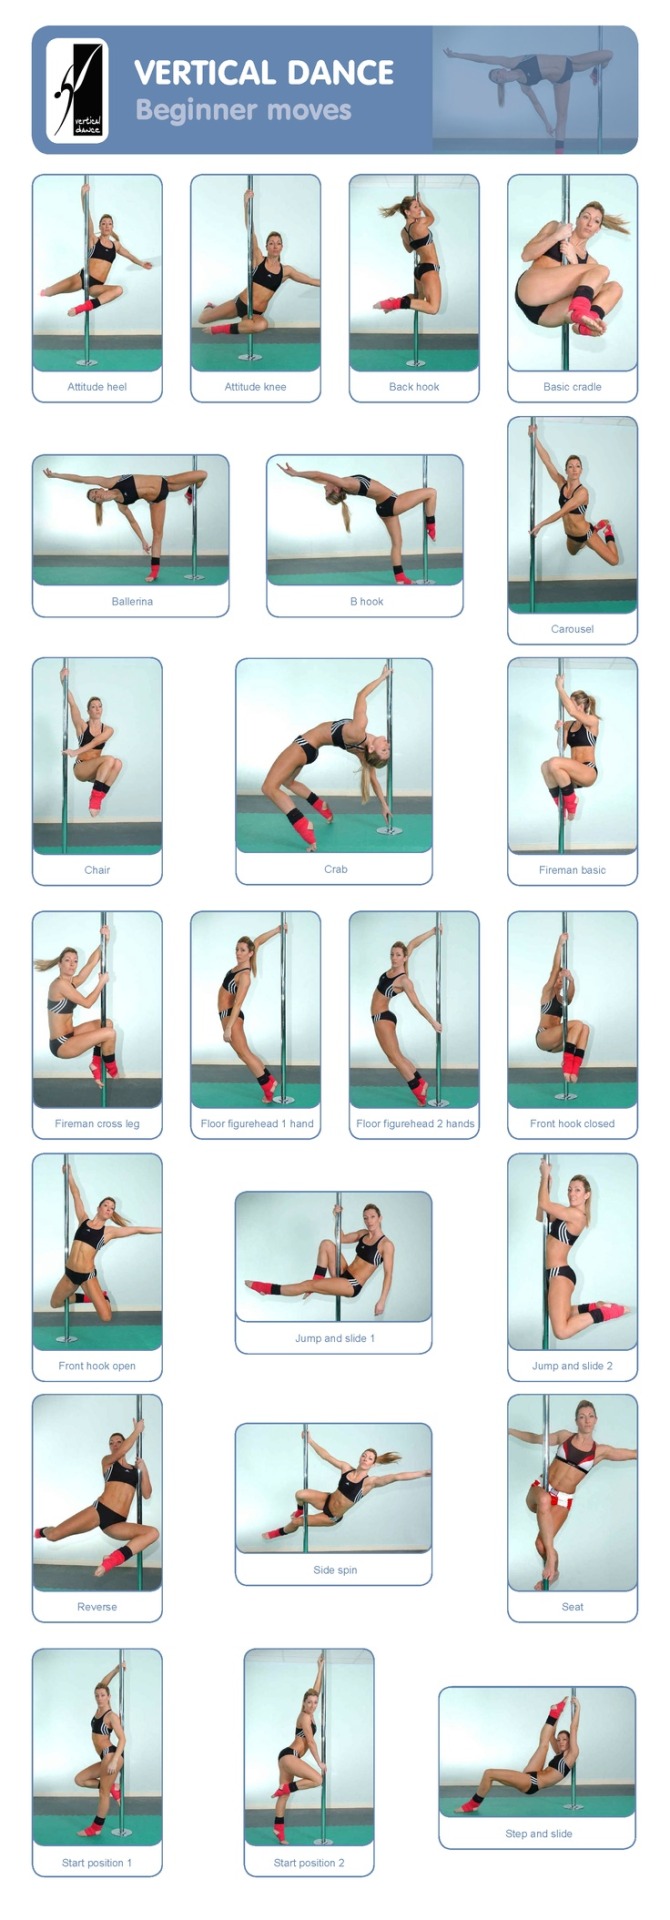 Pole Dancing Fairy — beginner pole moves. found on Pinterest.